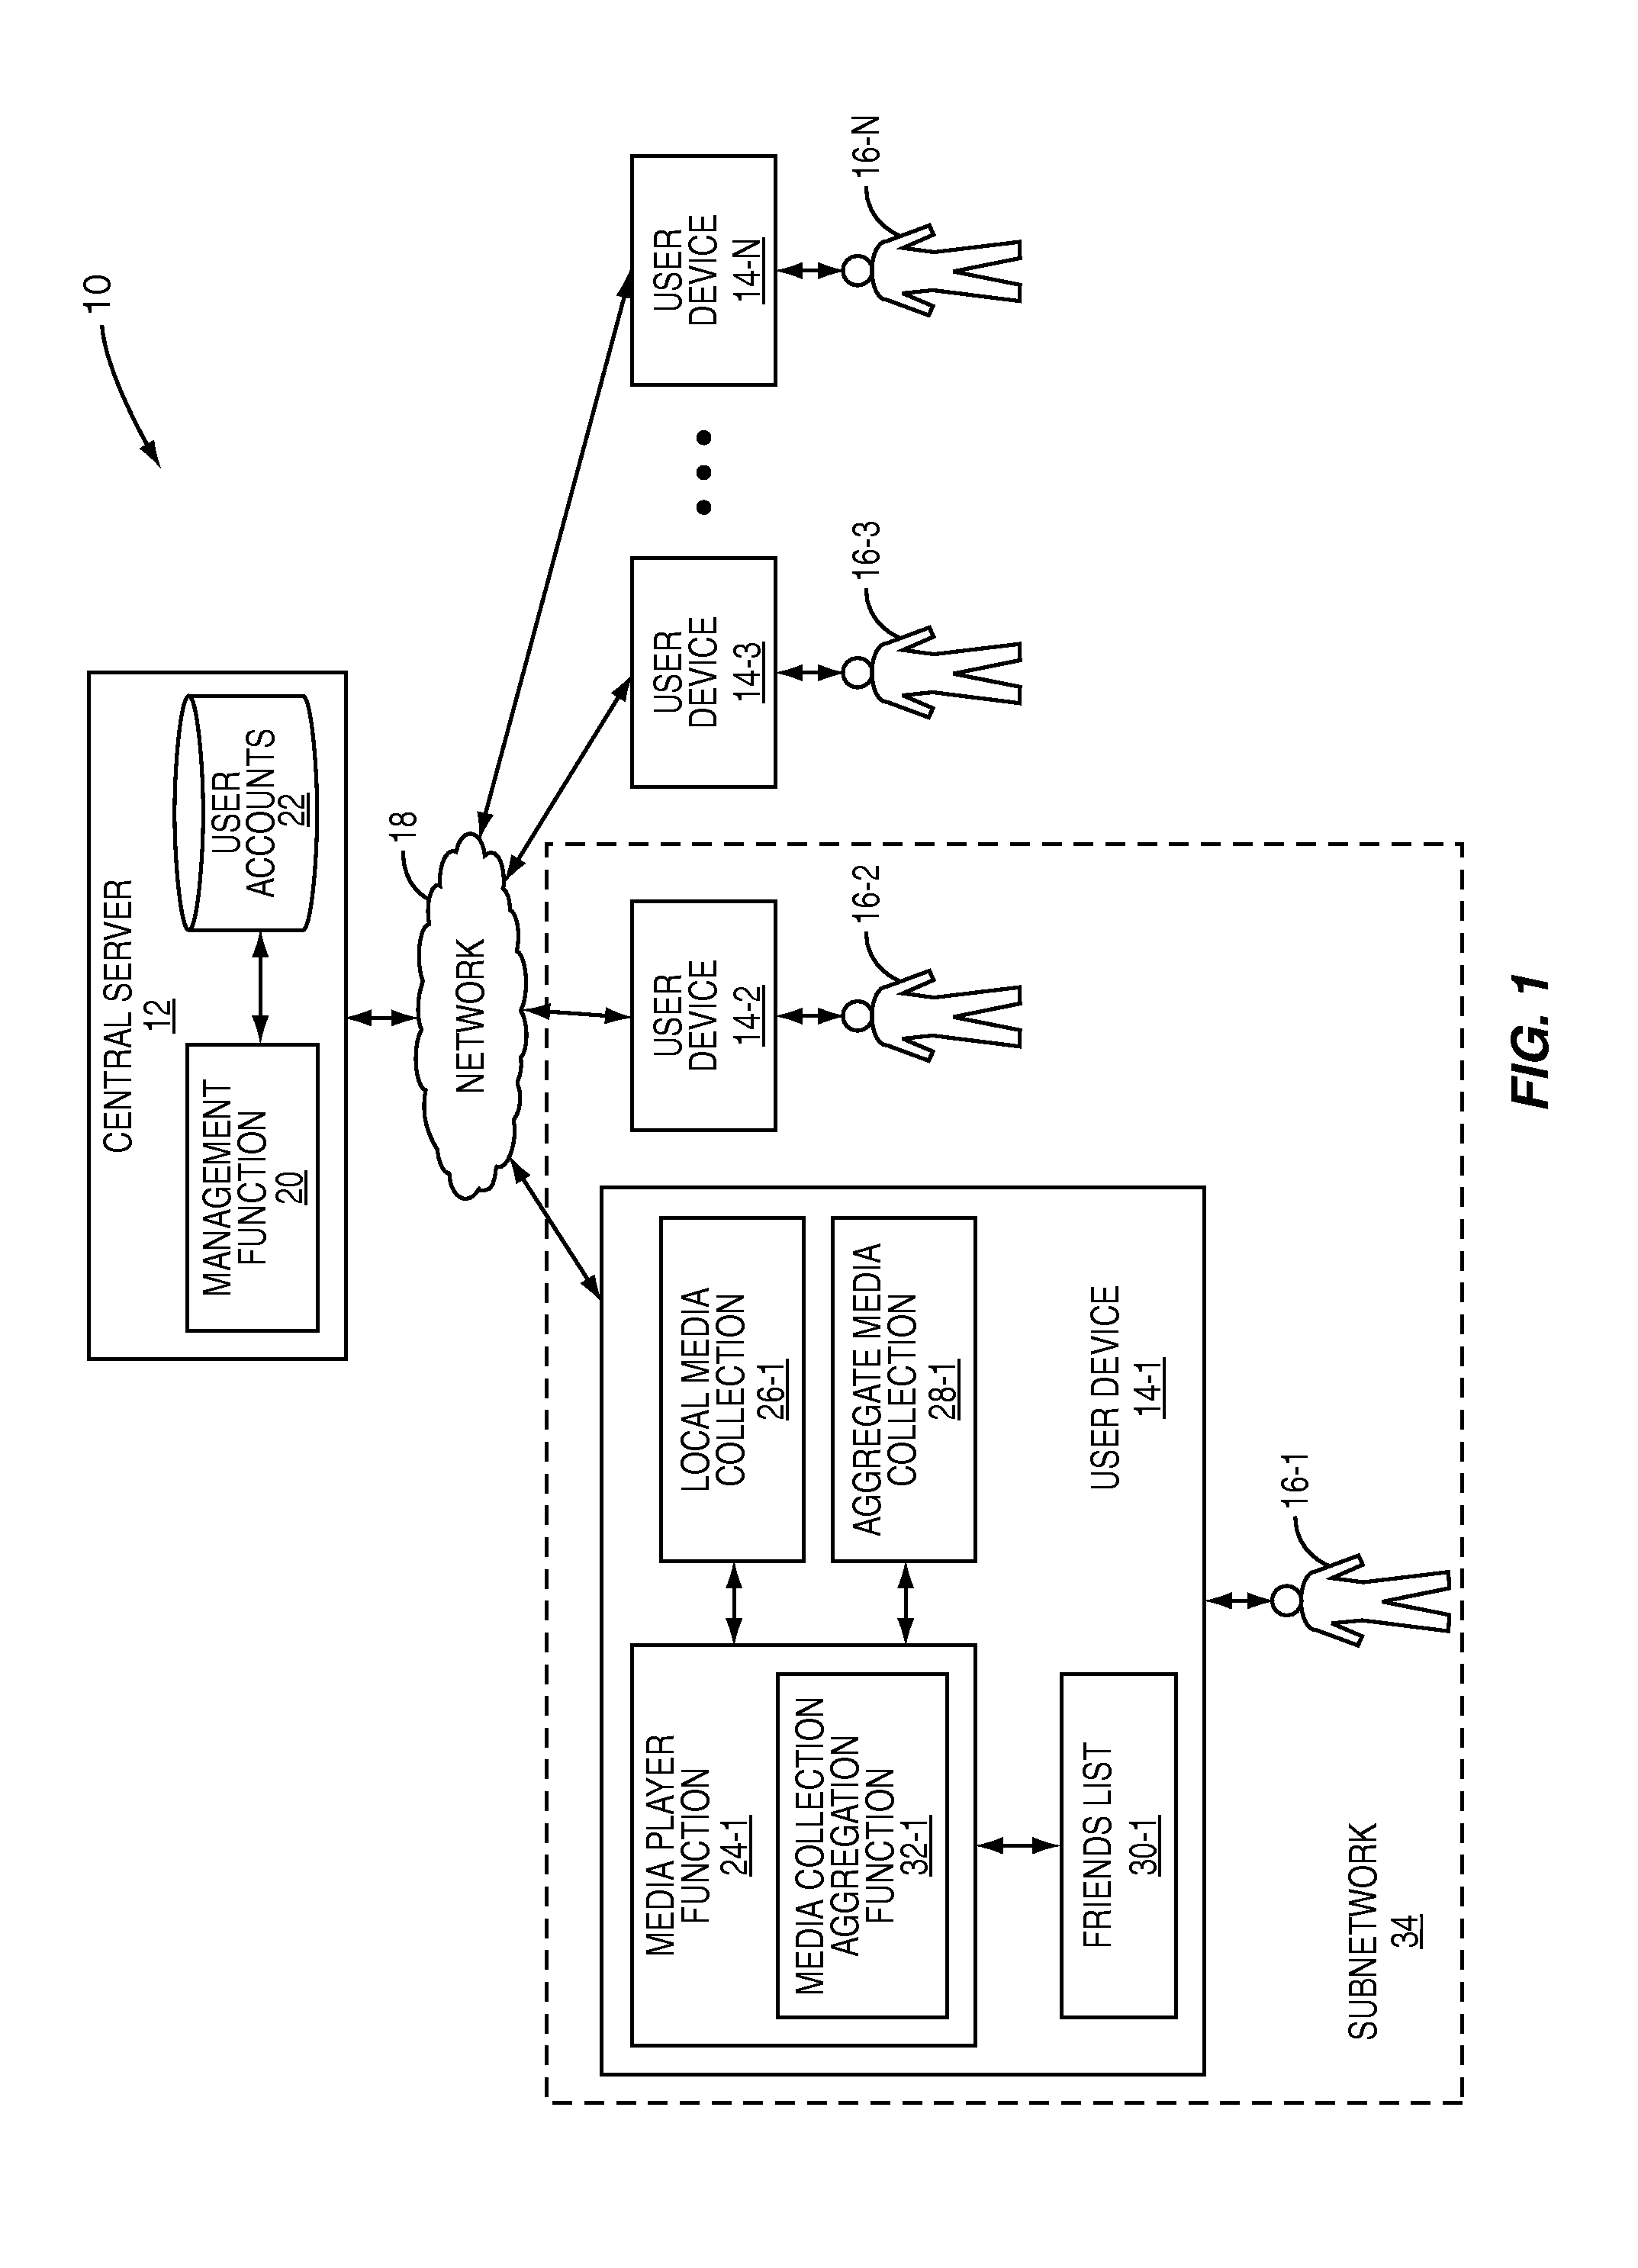 Method and system for aggregating media collections between participants of a sharing network